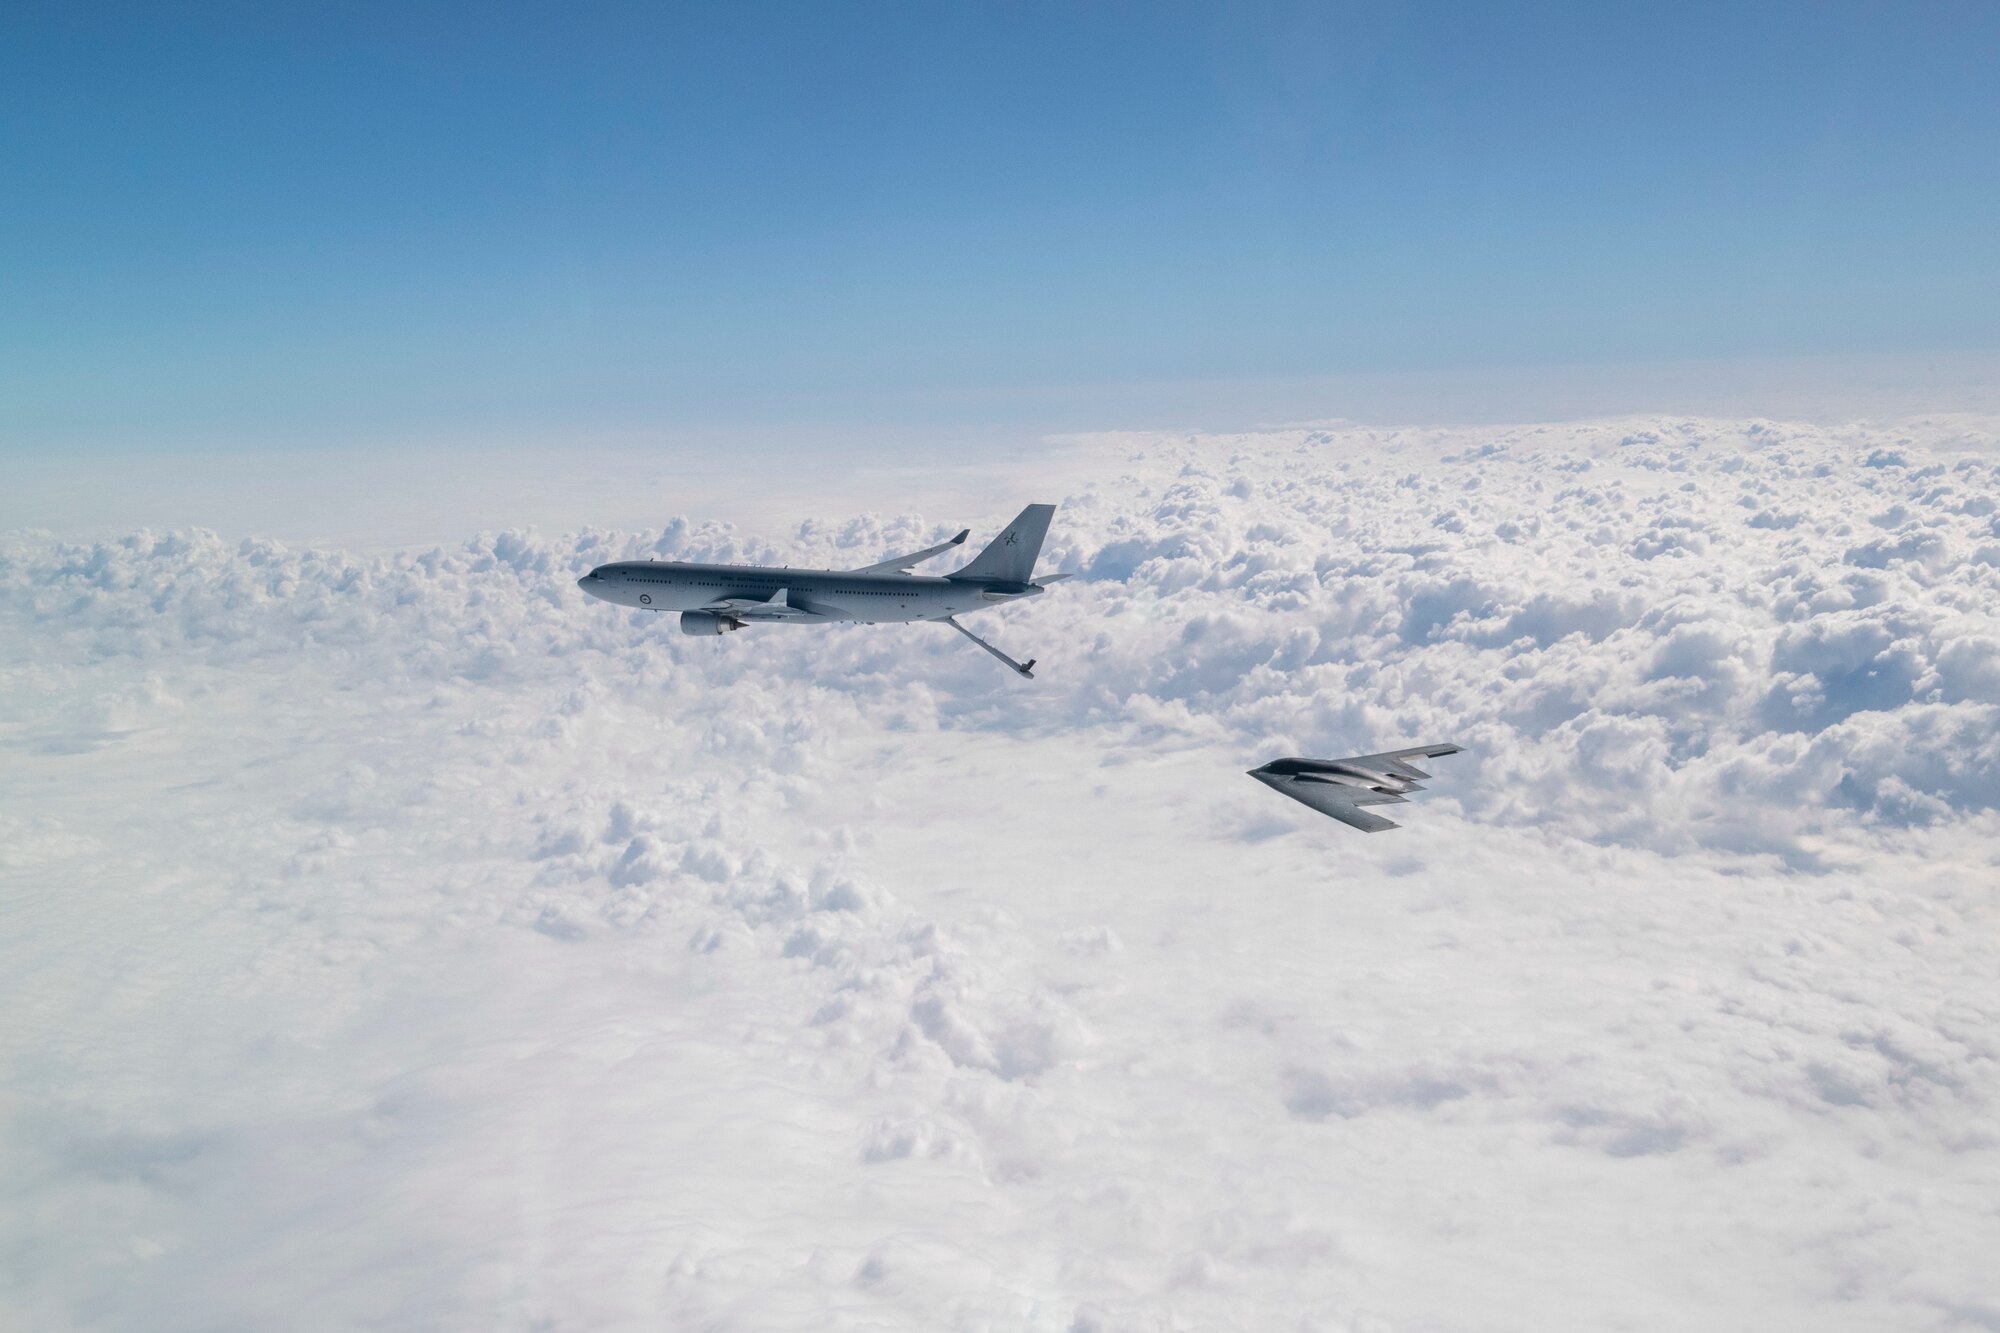 United States Air Force and Royal Australian Air Force aircraft perform bilateral training